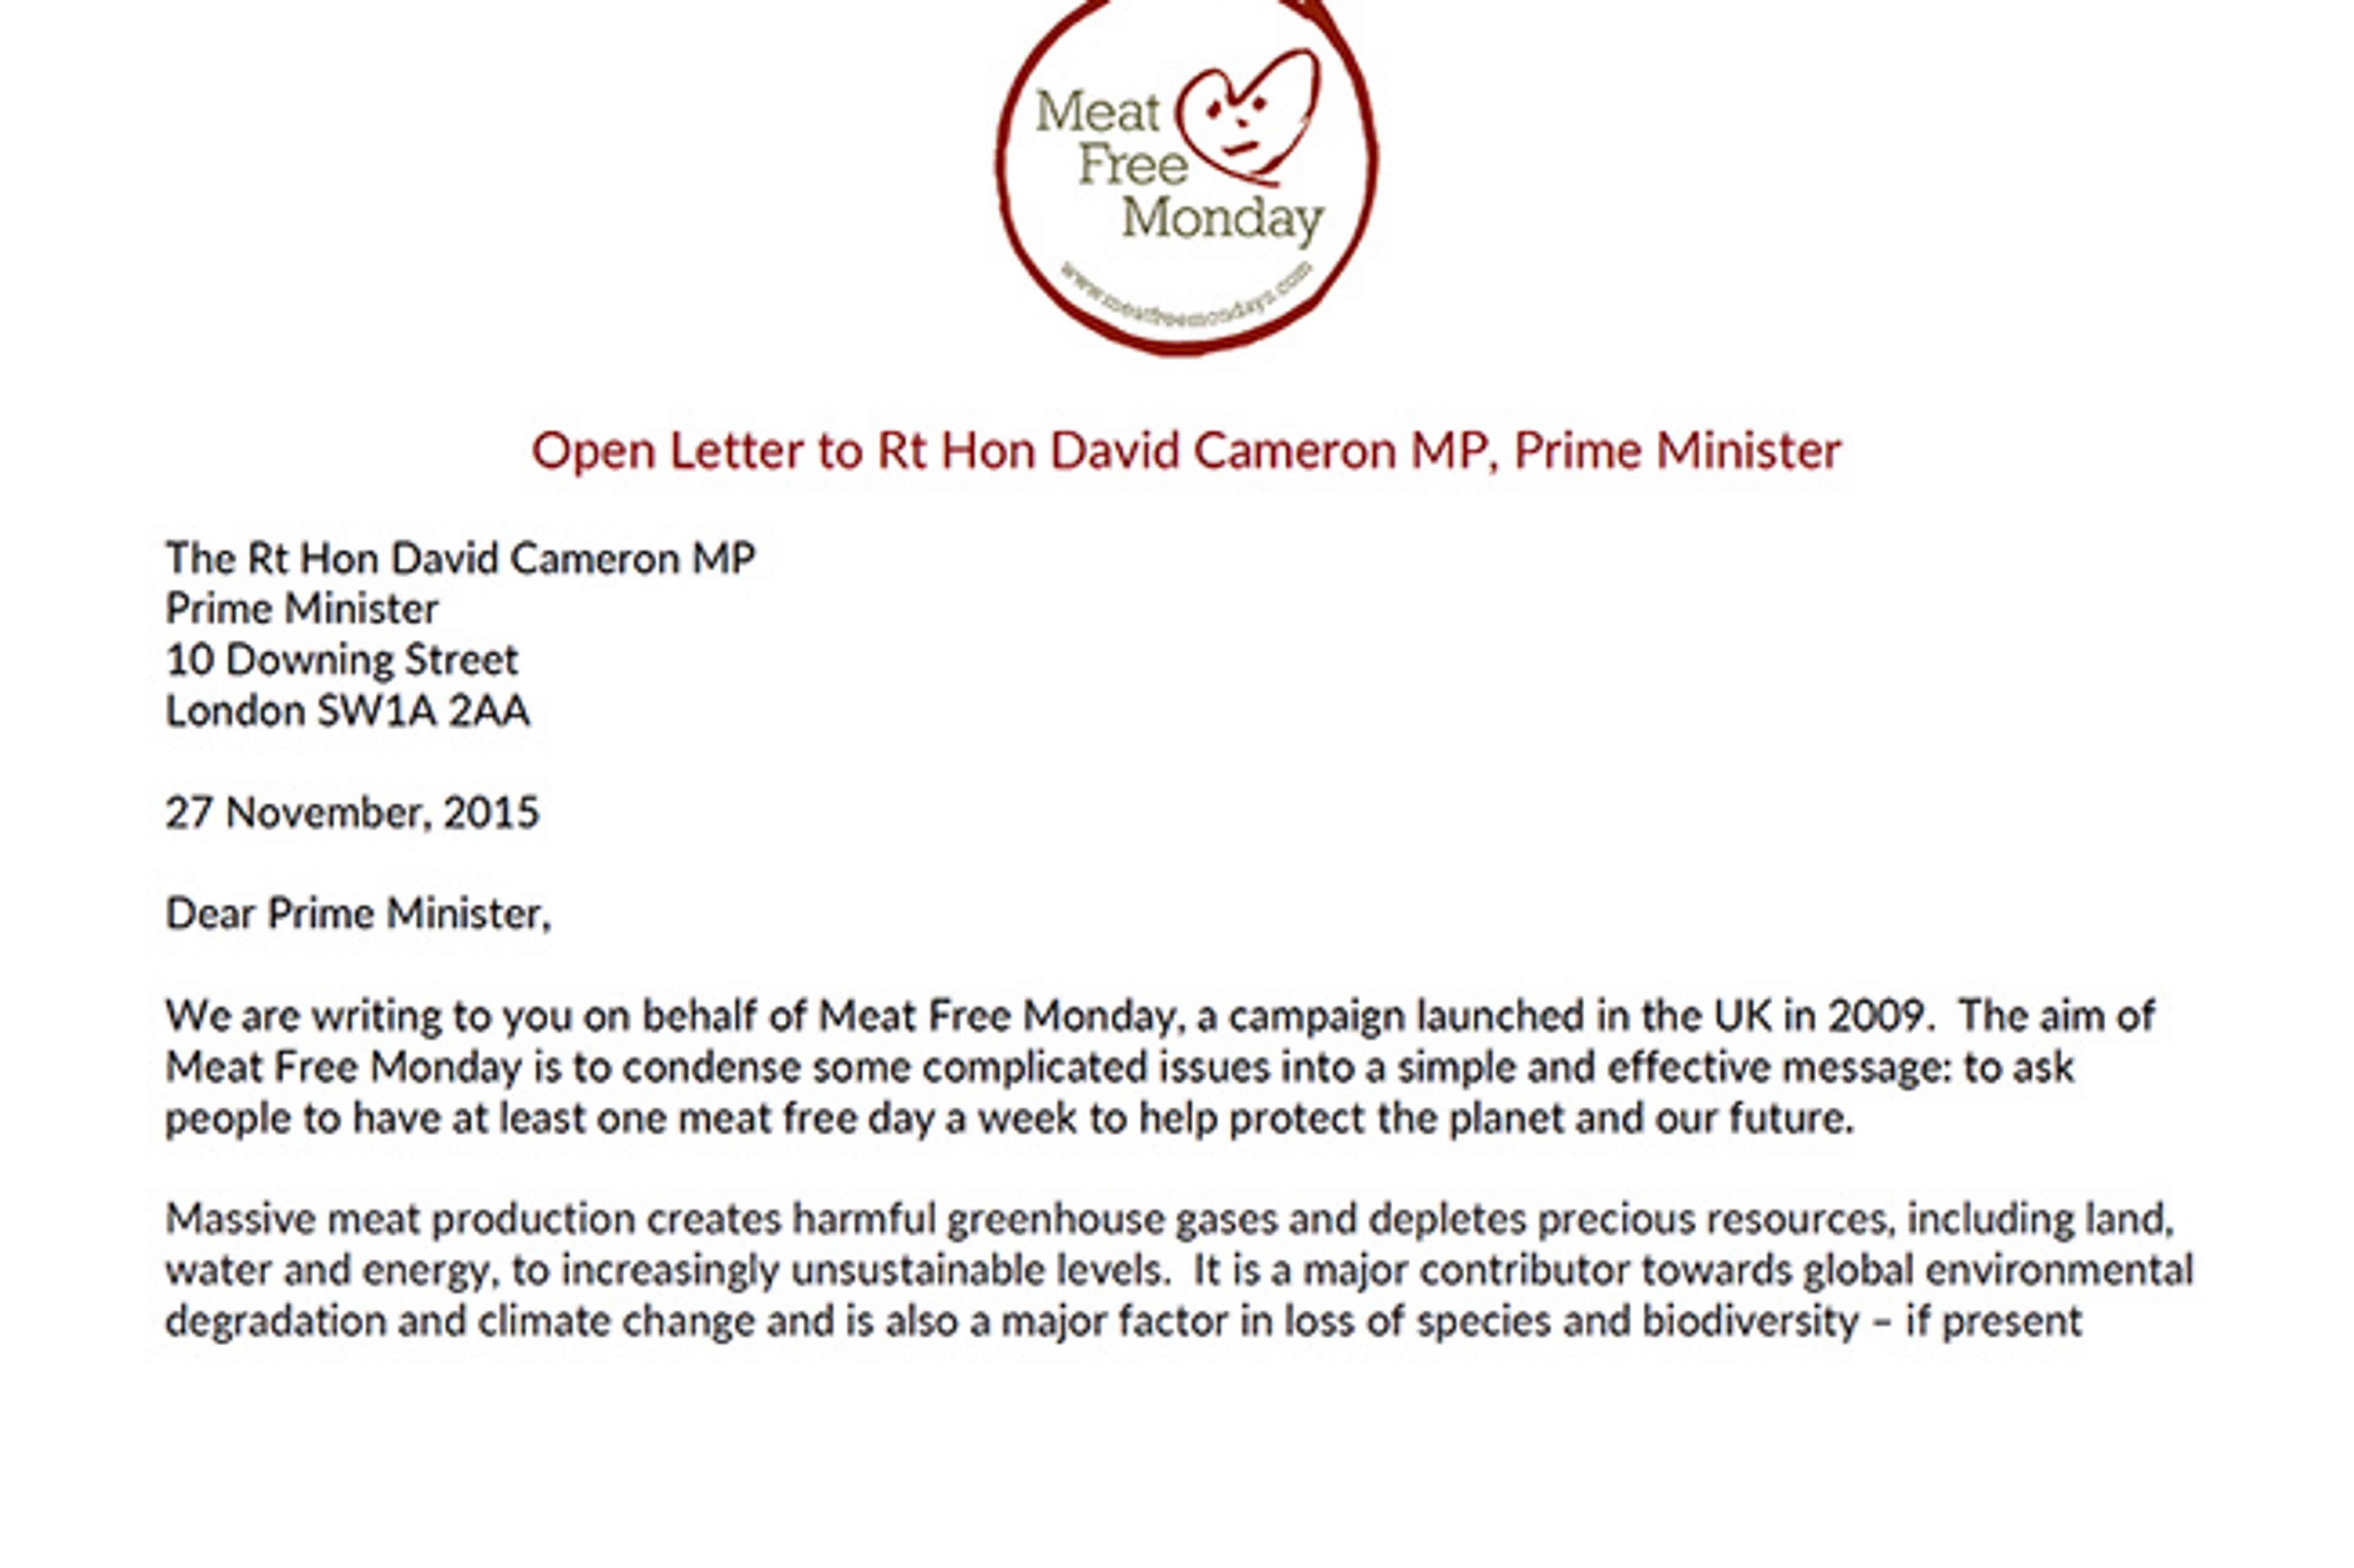 McCartney Family Ask UK PM to Raise Meat Reduction at COP21